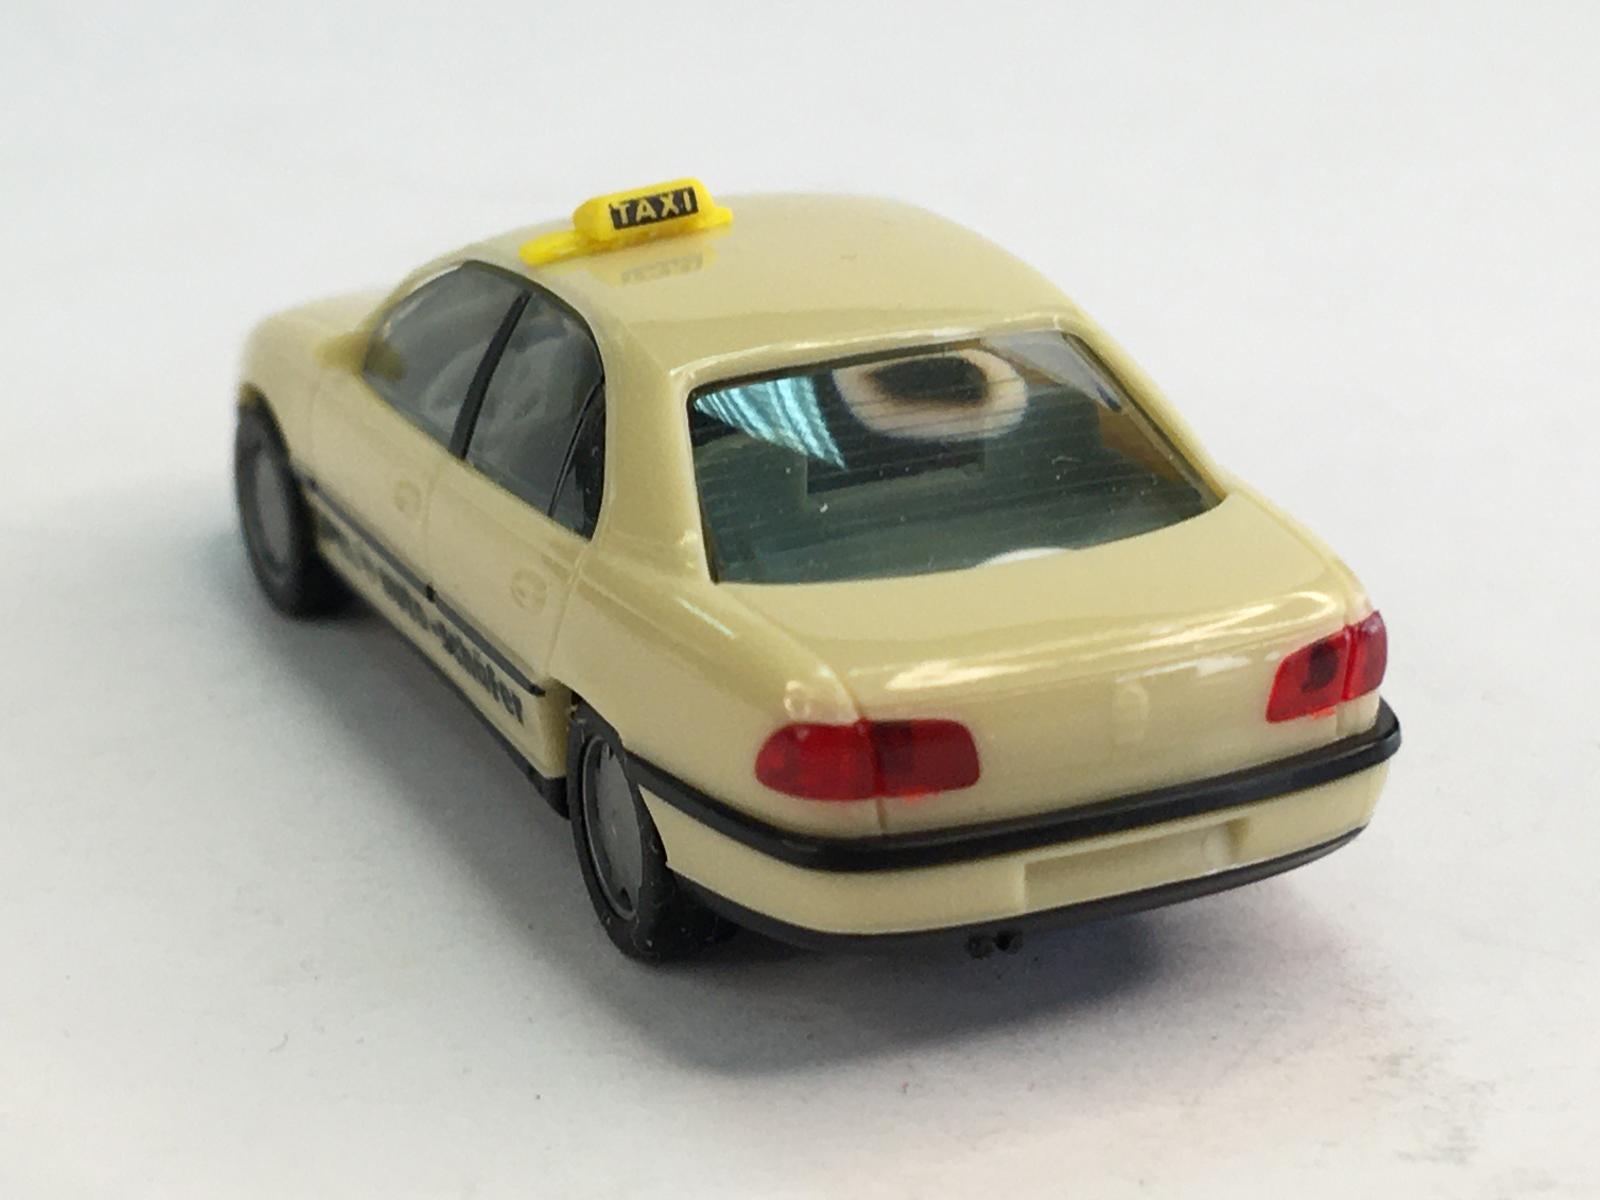 Opel Omega B TAXI - Herpa H0 1/87 (H13-h58) | Aukro